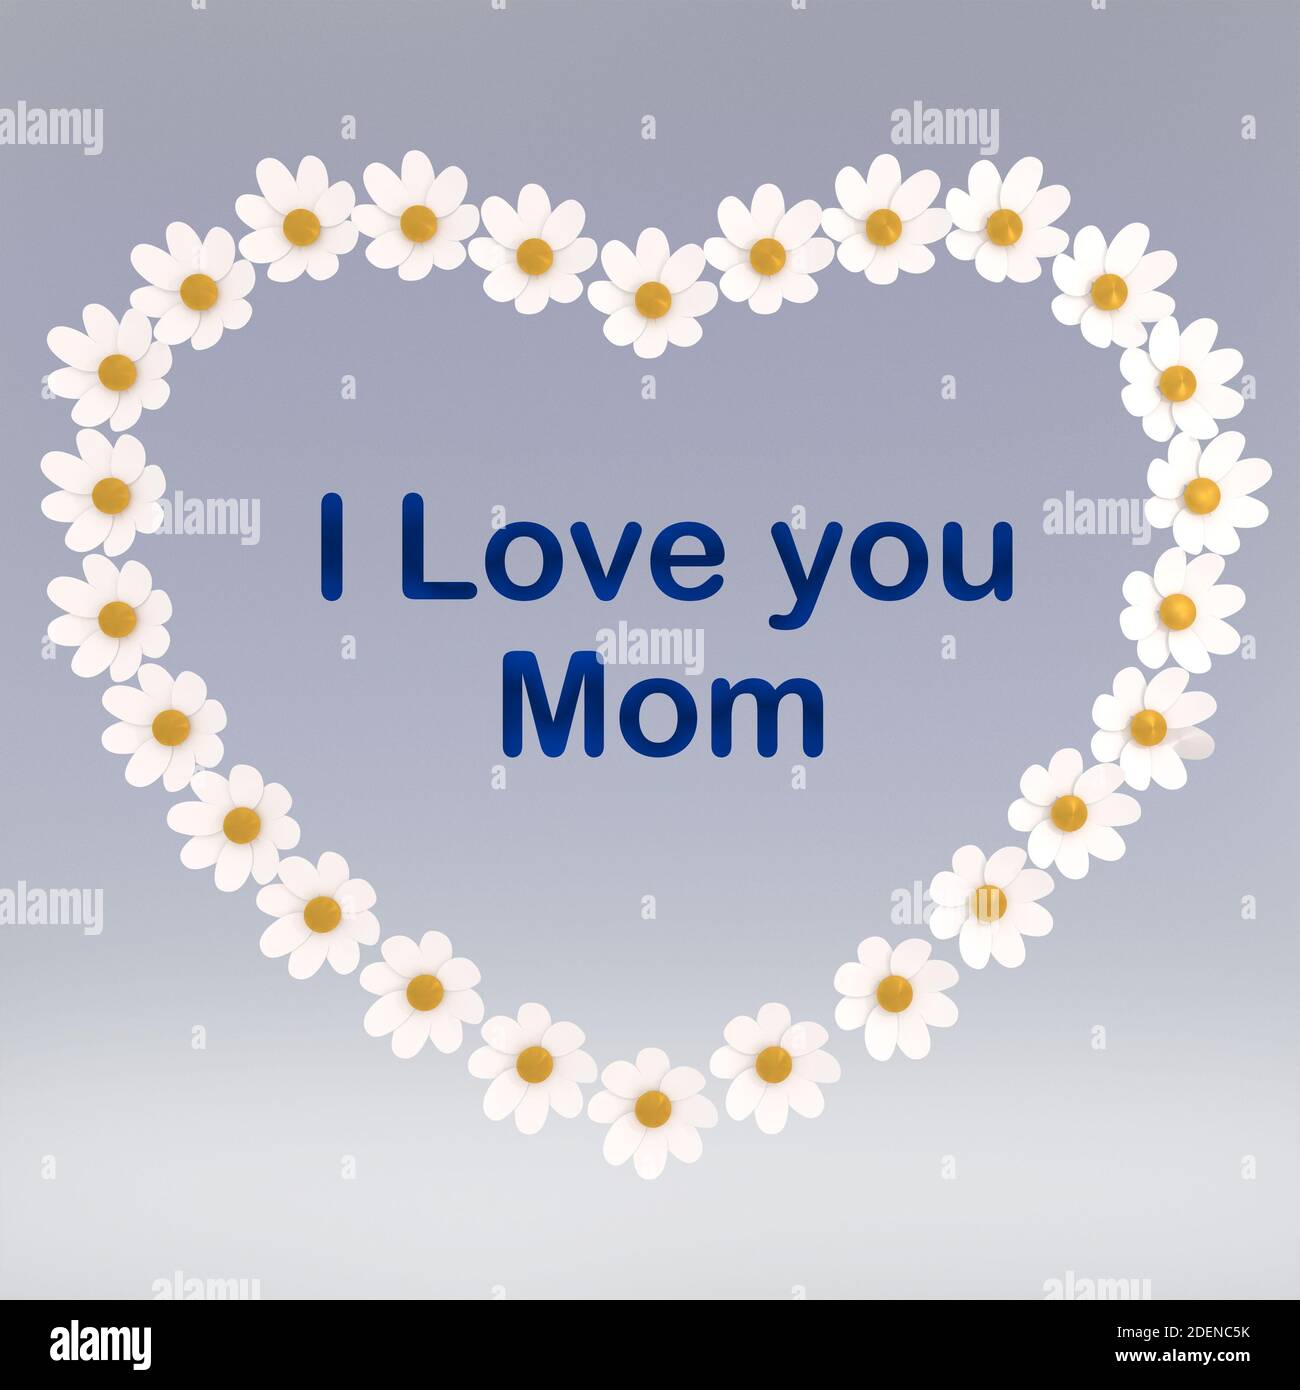 3d illustration of I Love you Mom text within a heart silhouette ...